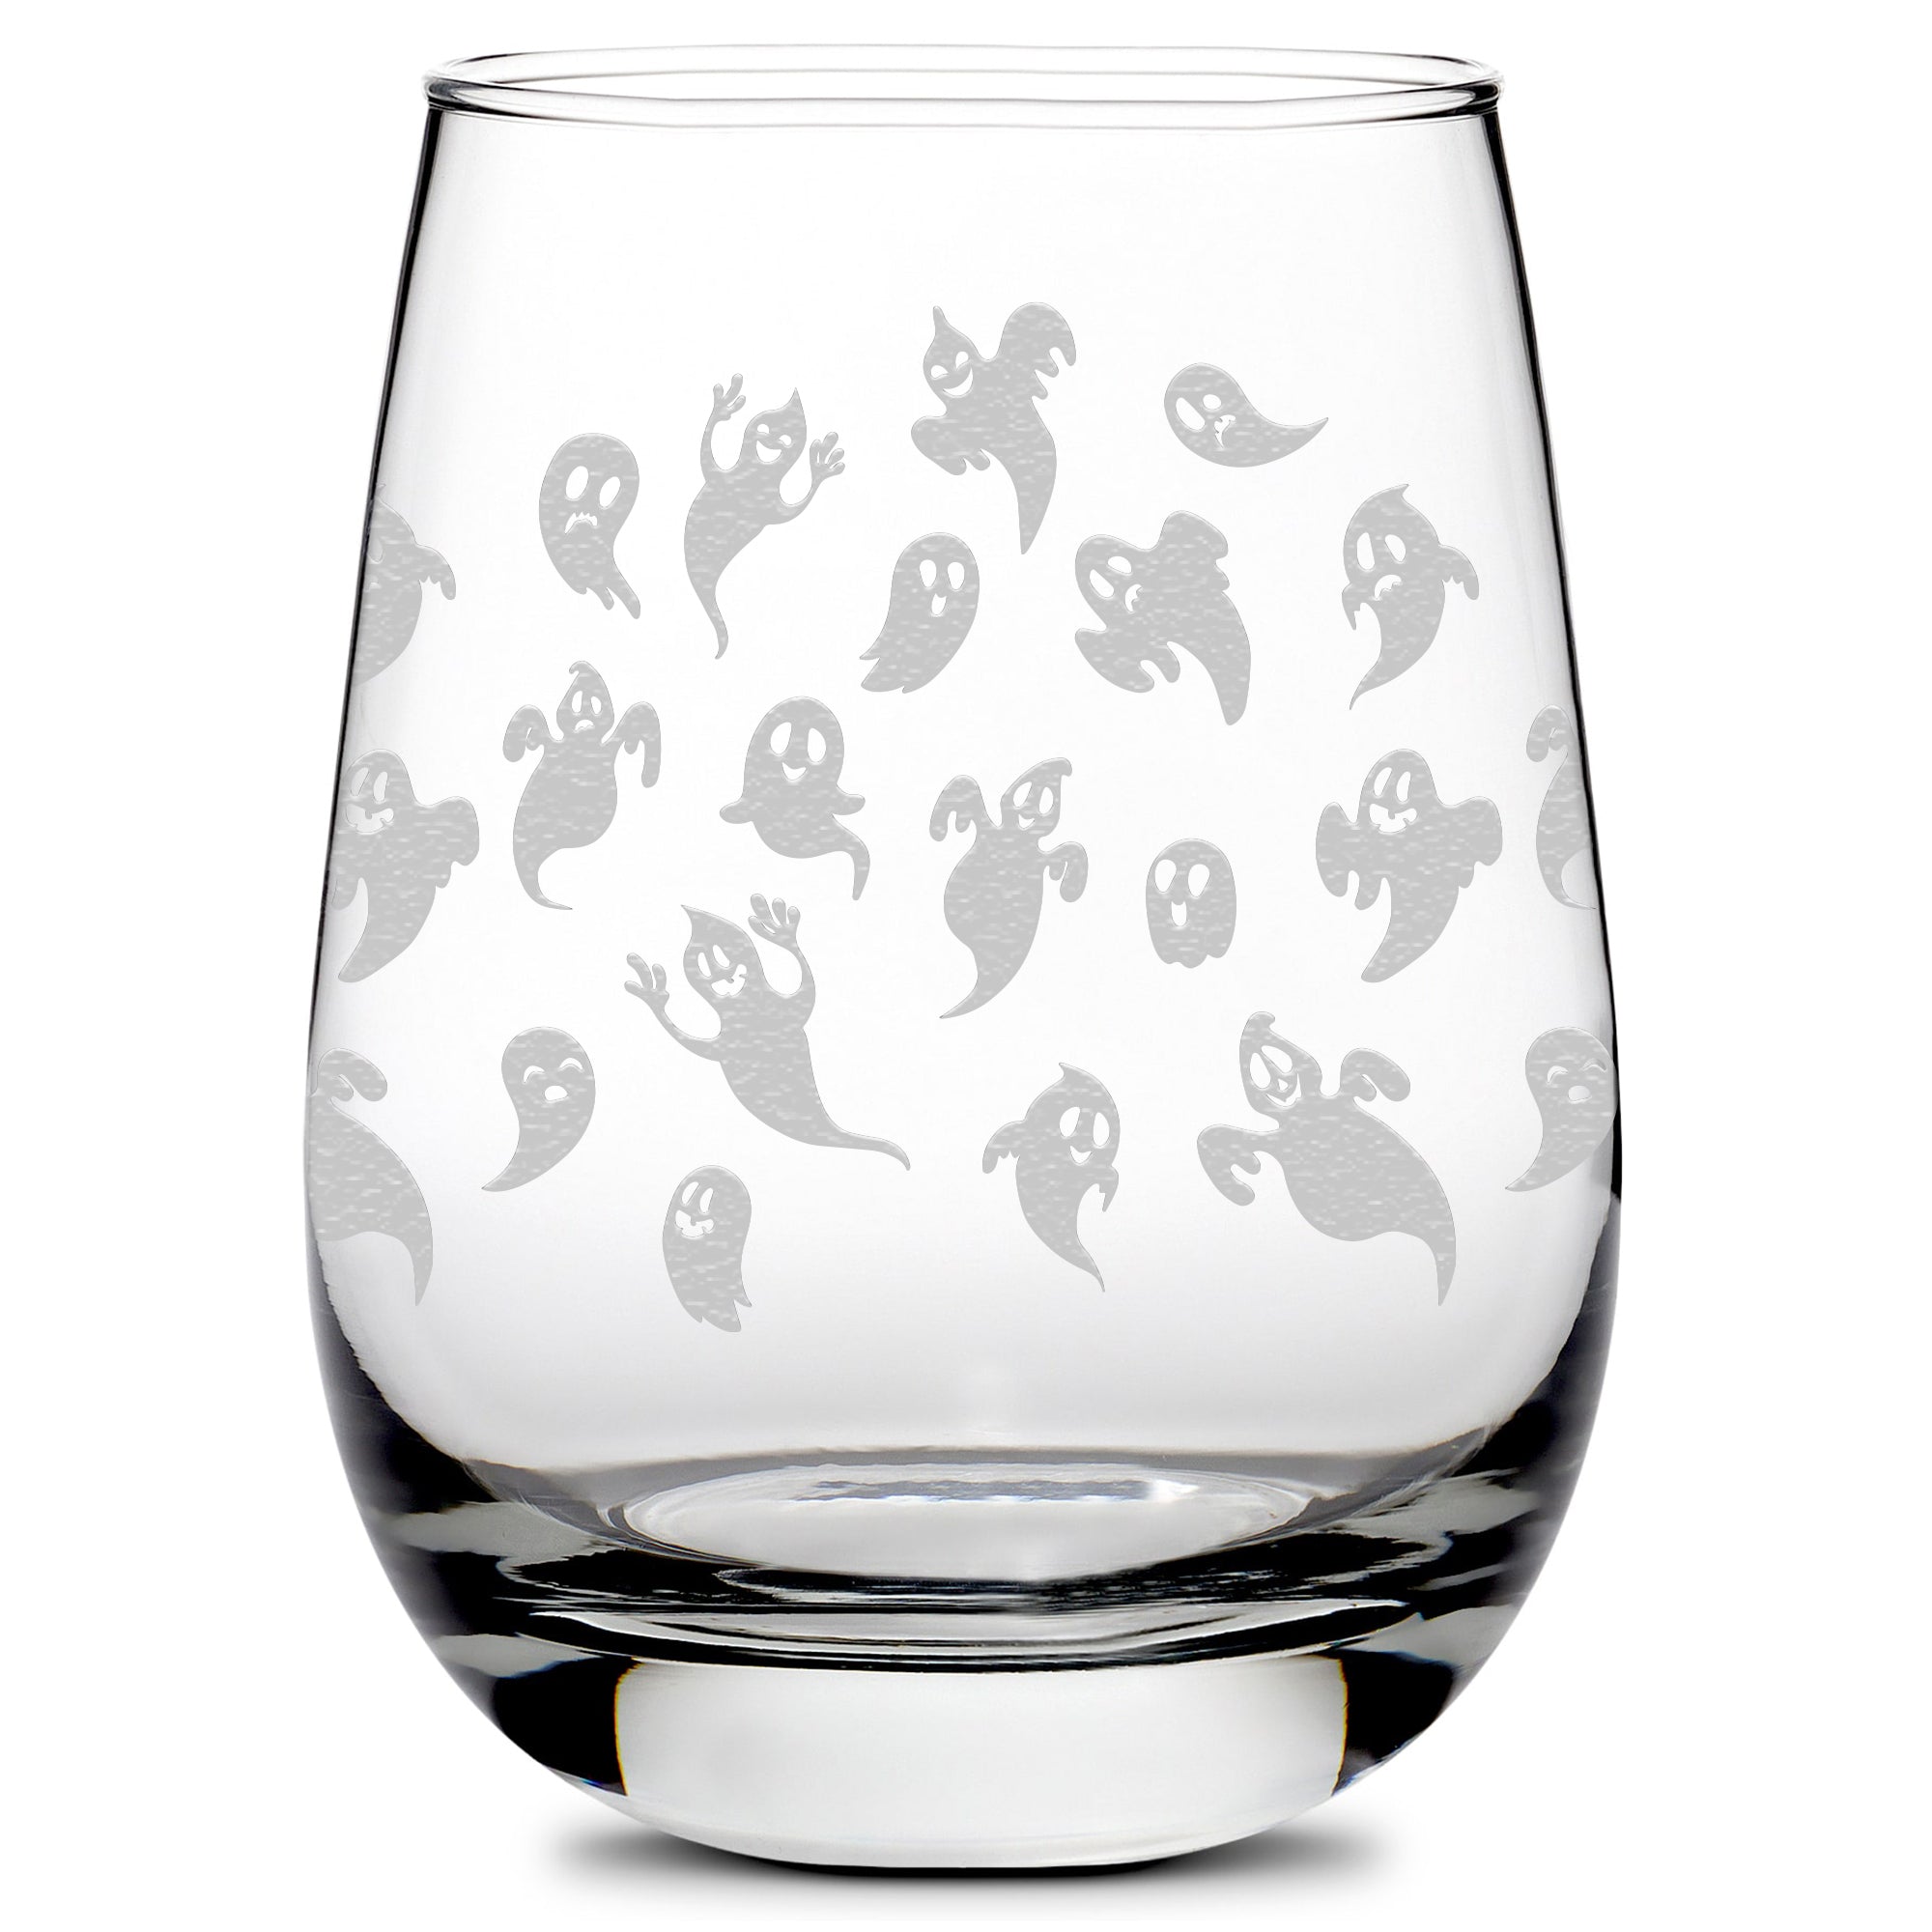 Integrity Bottles, Full 360°, Laser Etched, Halloween Ghost Wrap, Premium Wine Glass, Handmade, 16oz, Laser Etched or Hand Etched